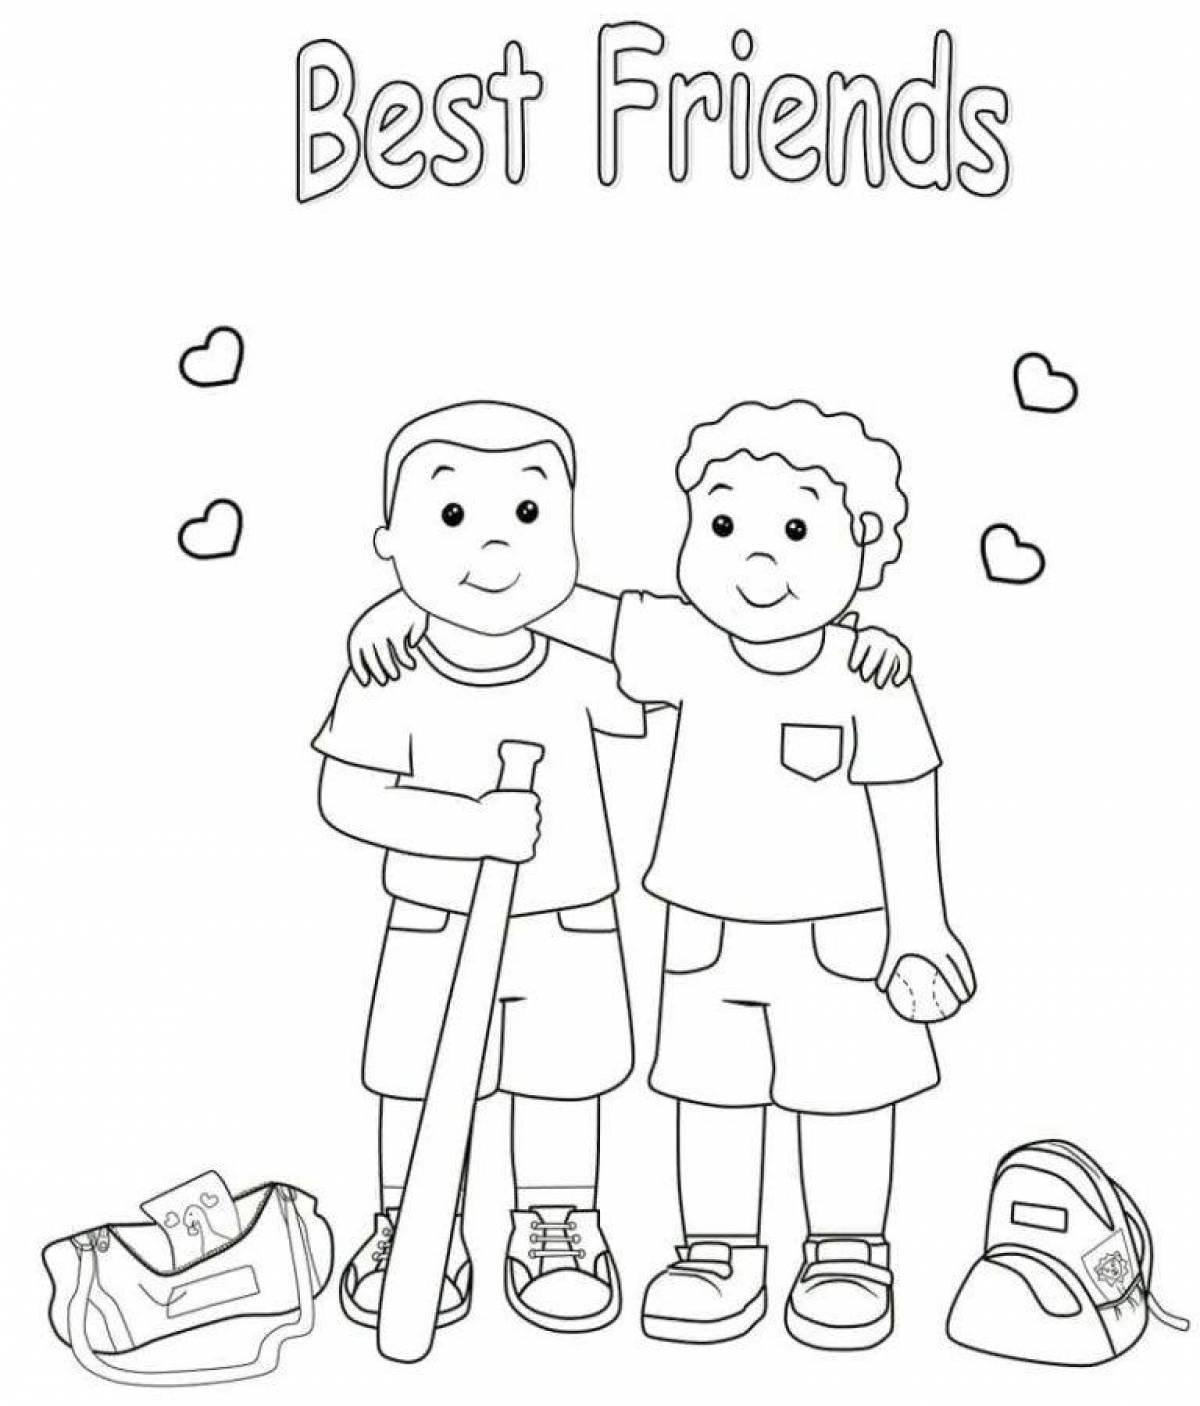 Coloring-encounters friends coloring page